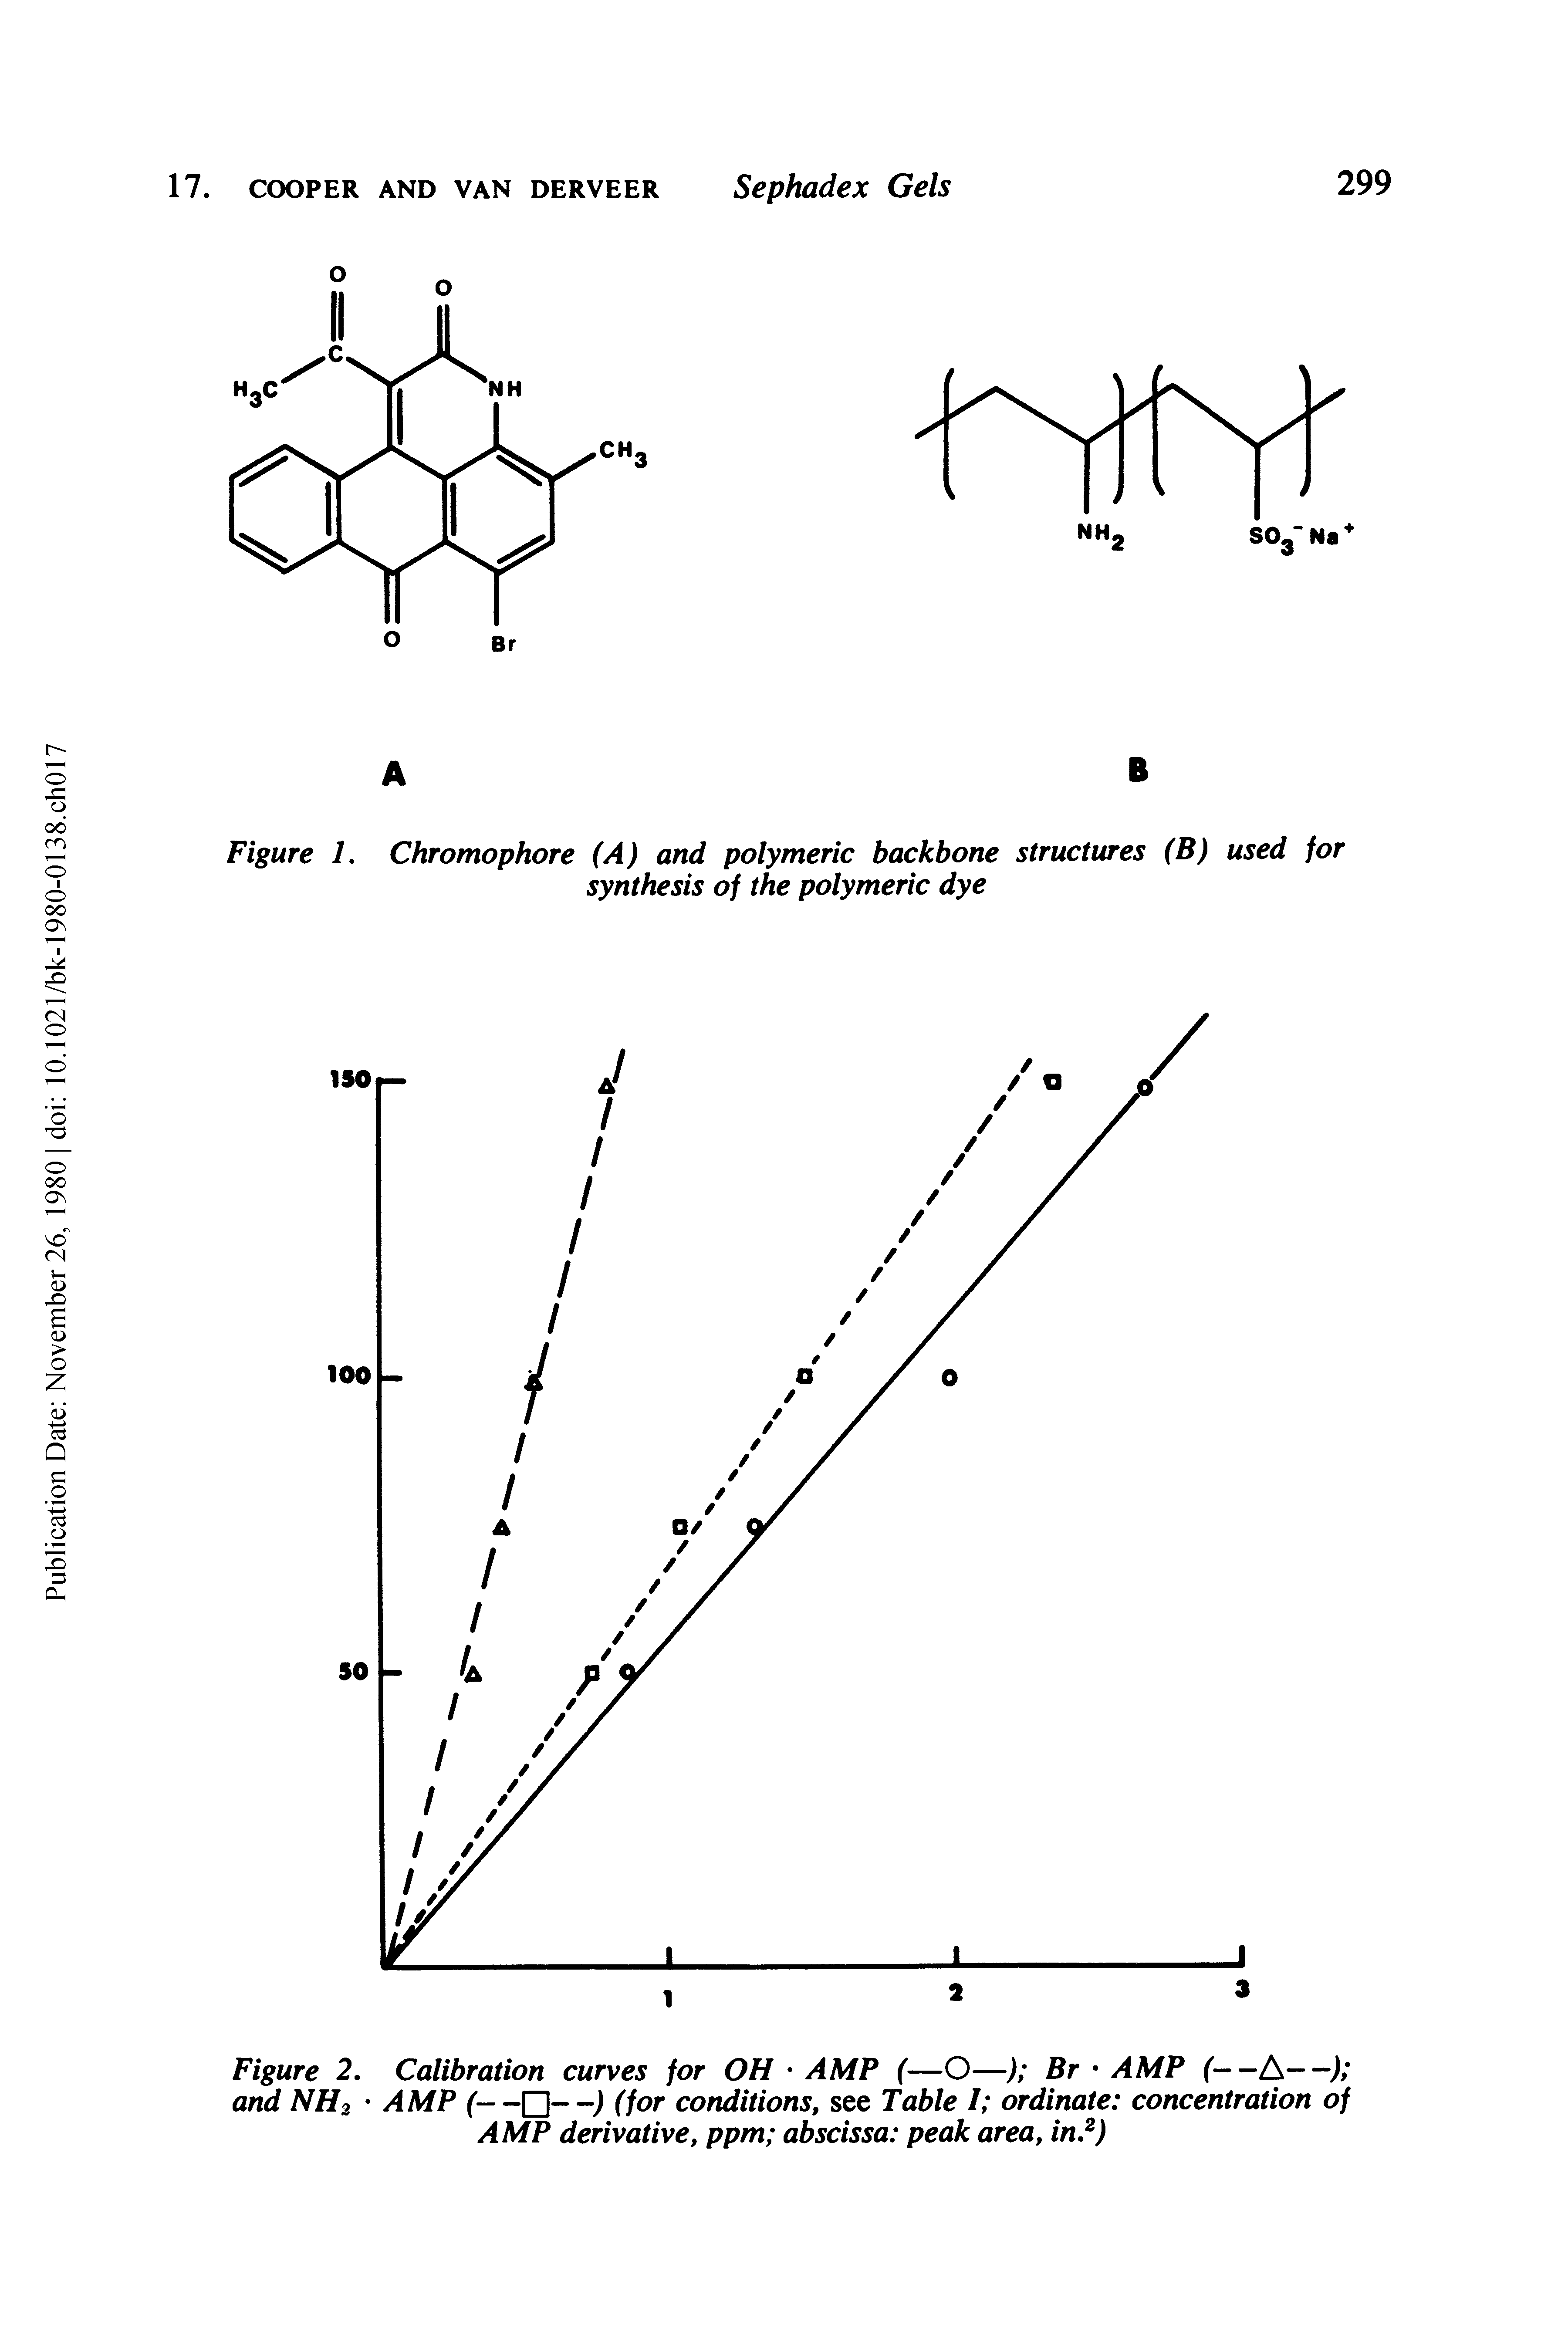 Figure 1. Chromophore (A) and polymeric backbone structures (B) used for synthesis of the polymeric dye...